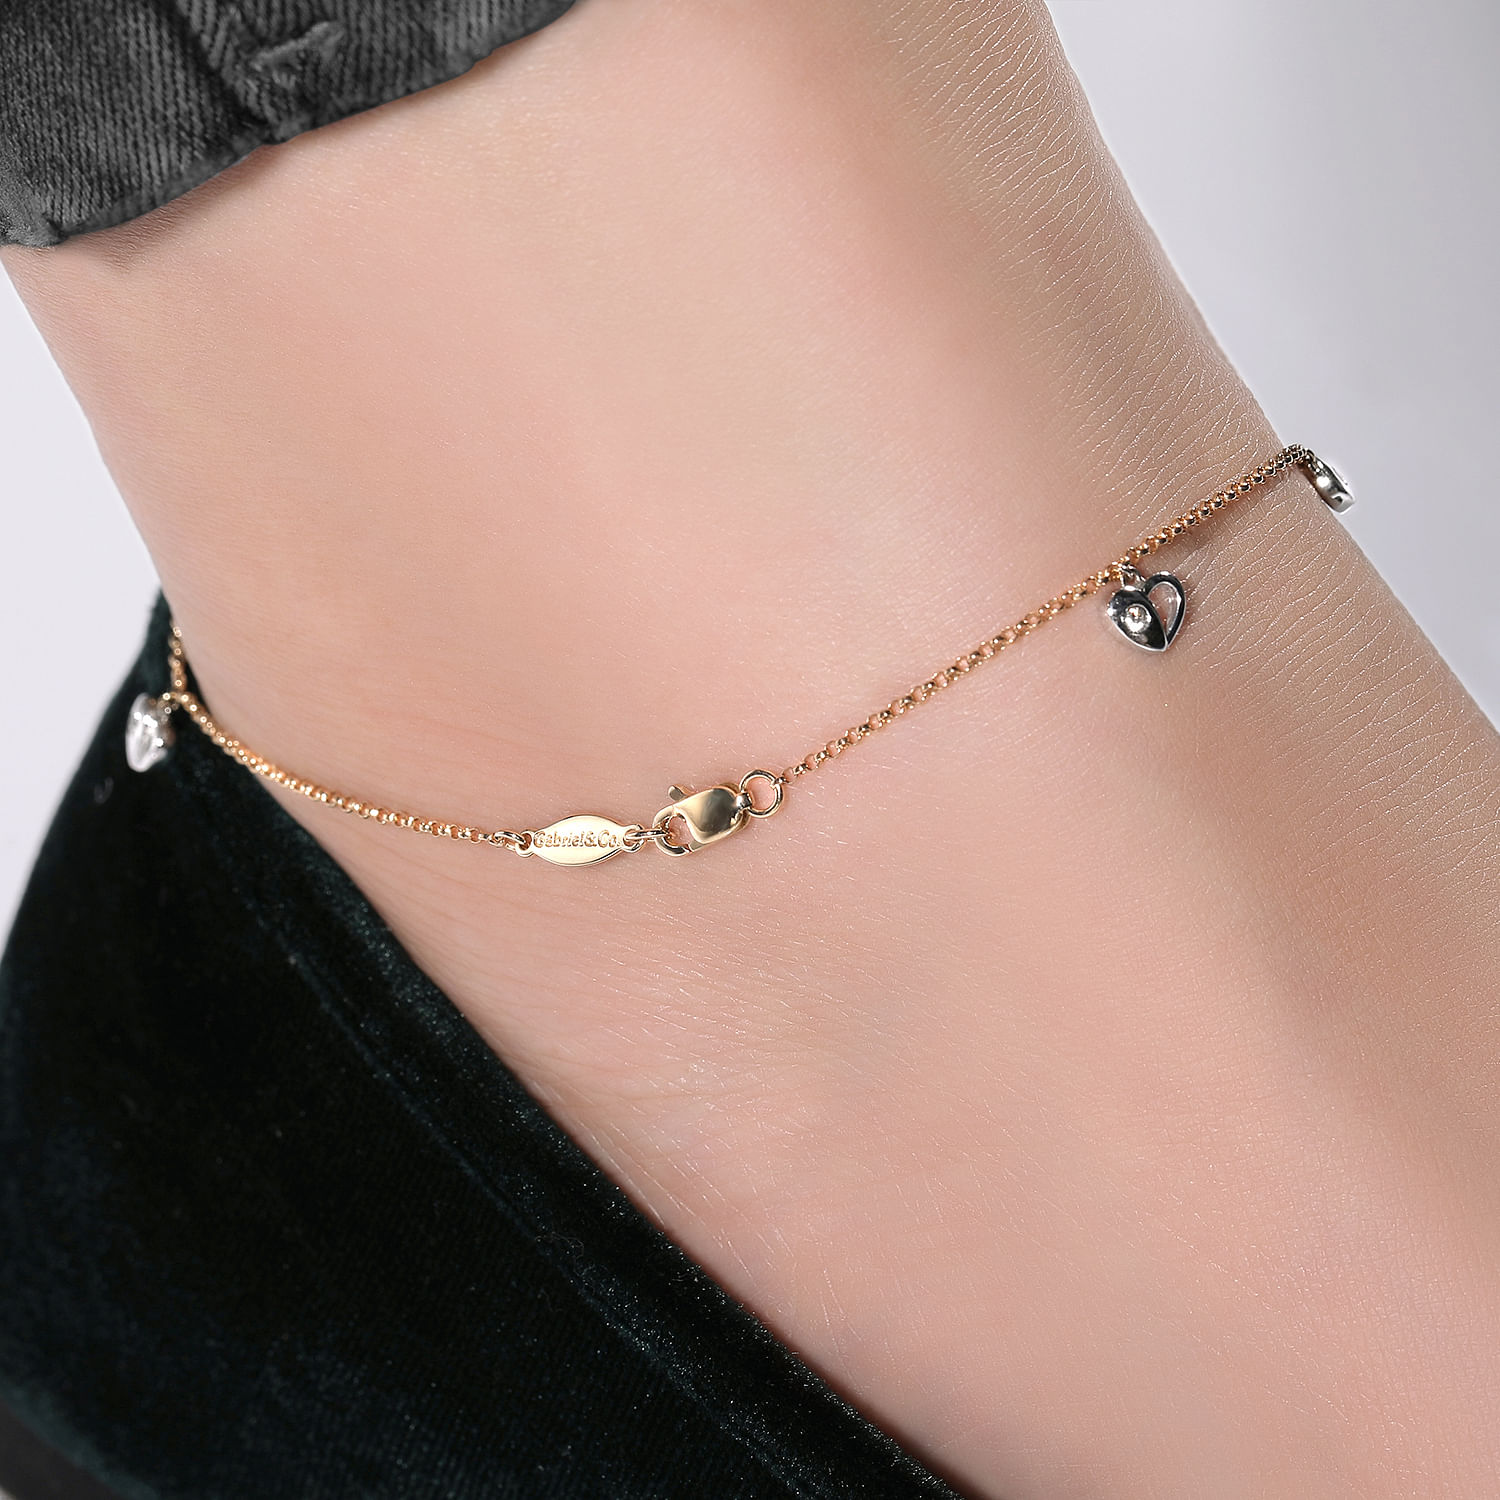 14K Yellow Gold Chain Ankle Bracelet with White Gold Diamond Heart and Teardrop Charms